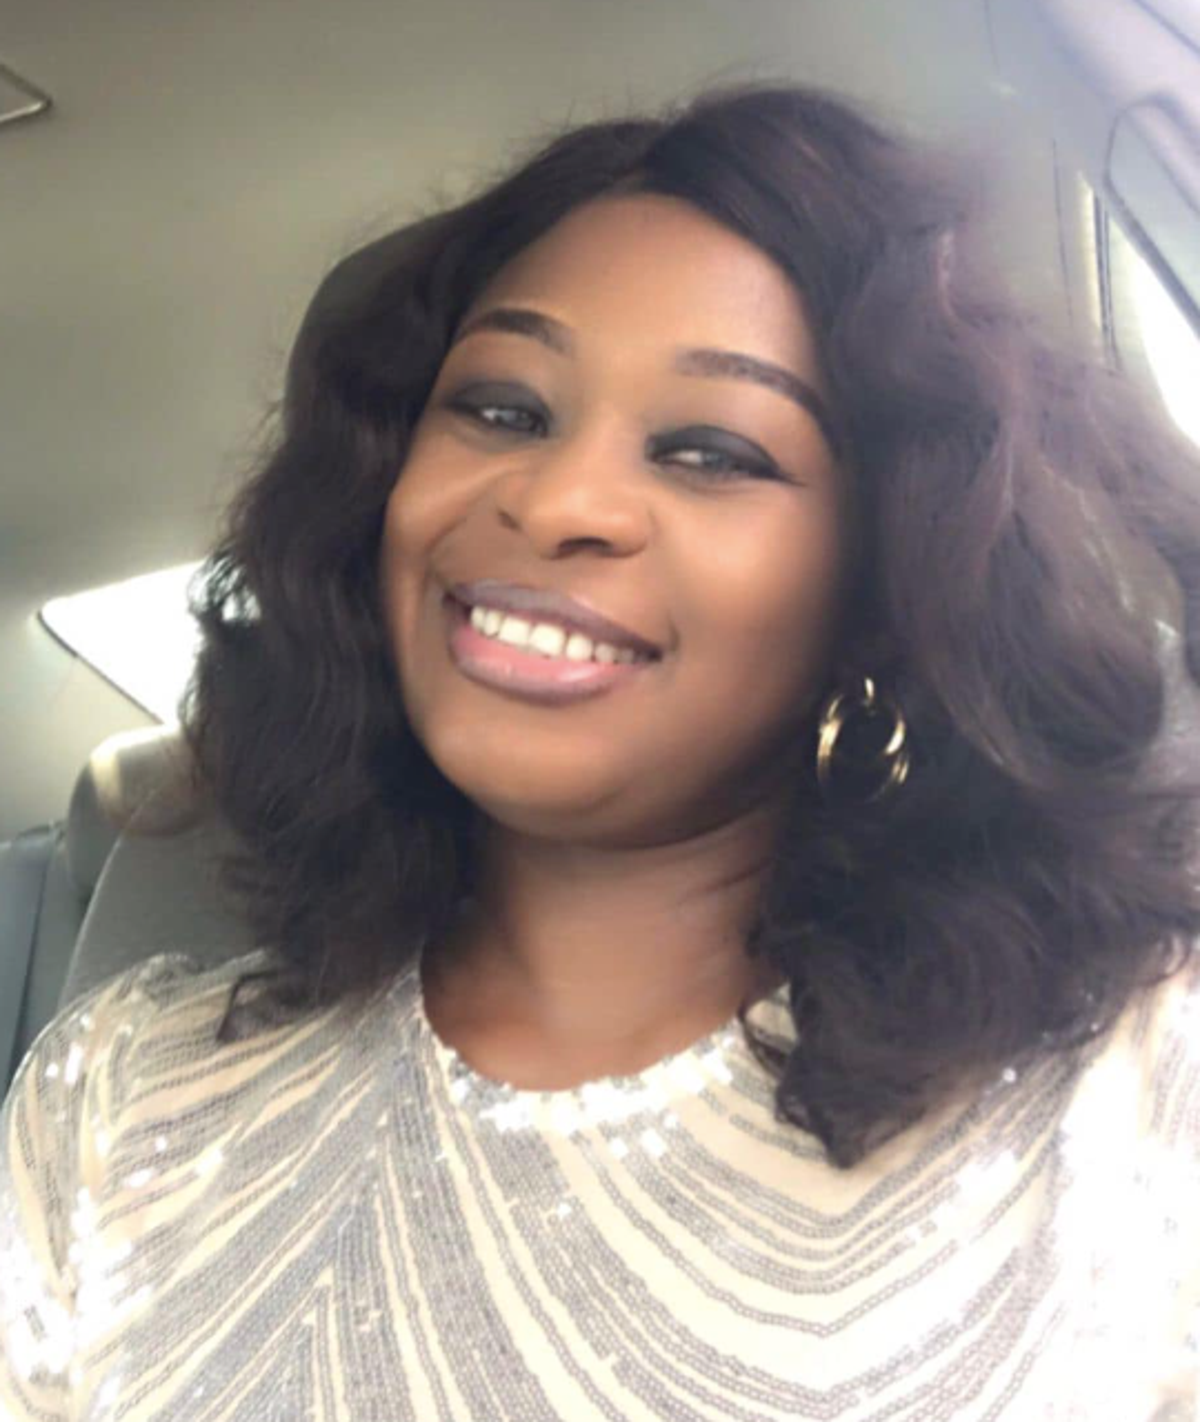 Chioma Okoli said she was detained by police a week after the post  (via Facebook)